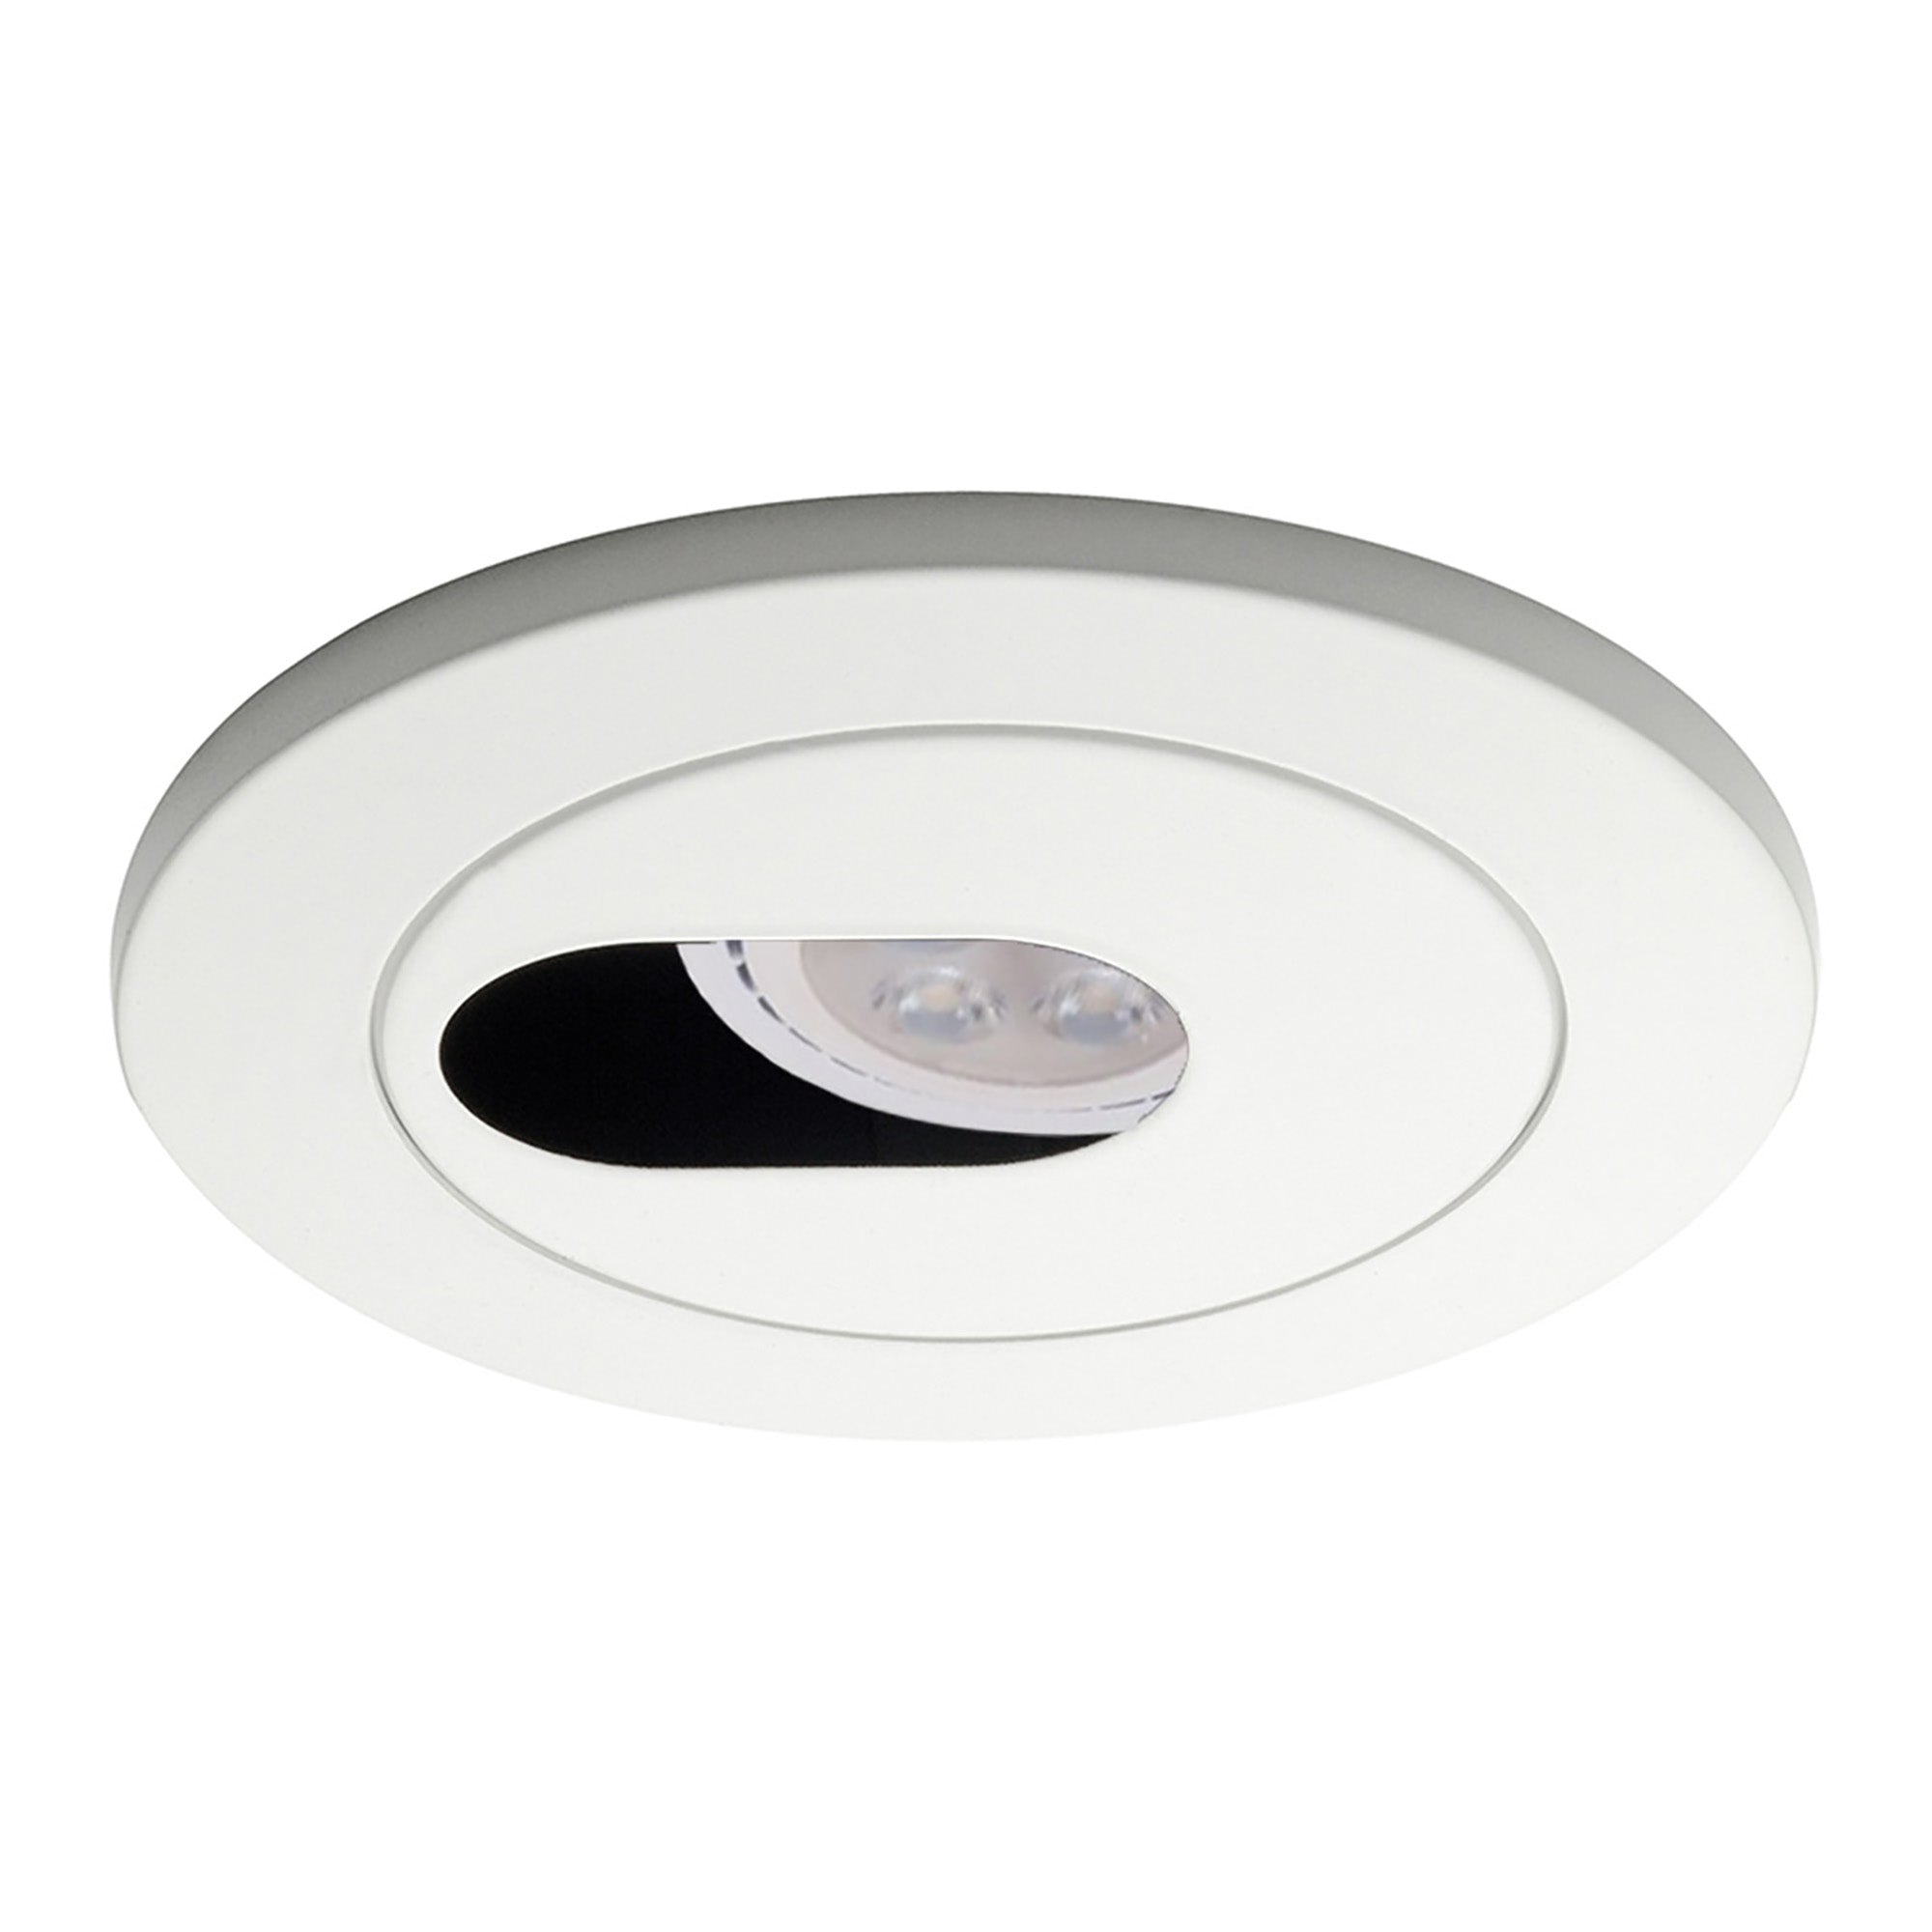 4" Round Slotted Trim with LED Bulb